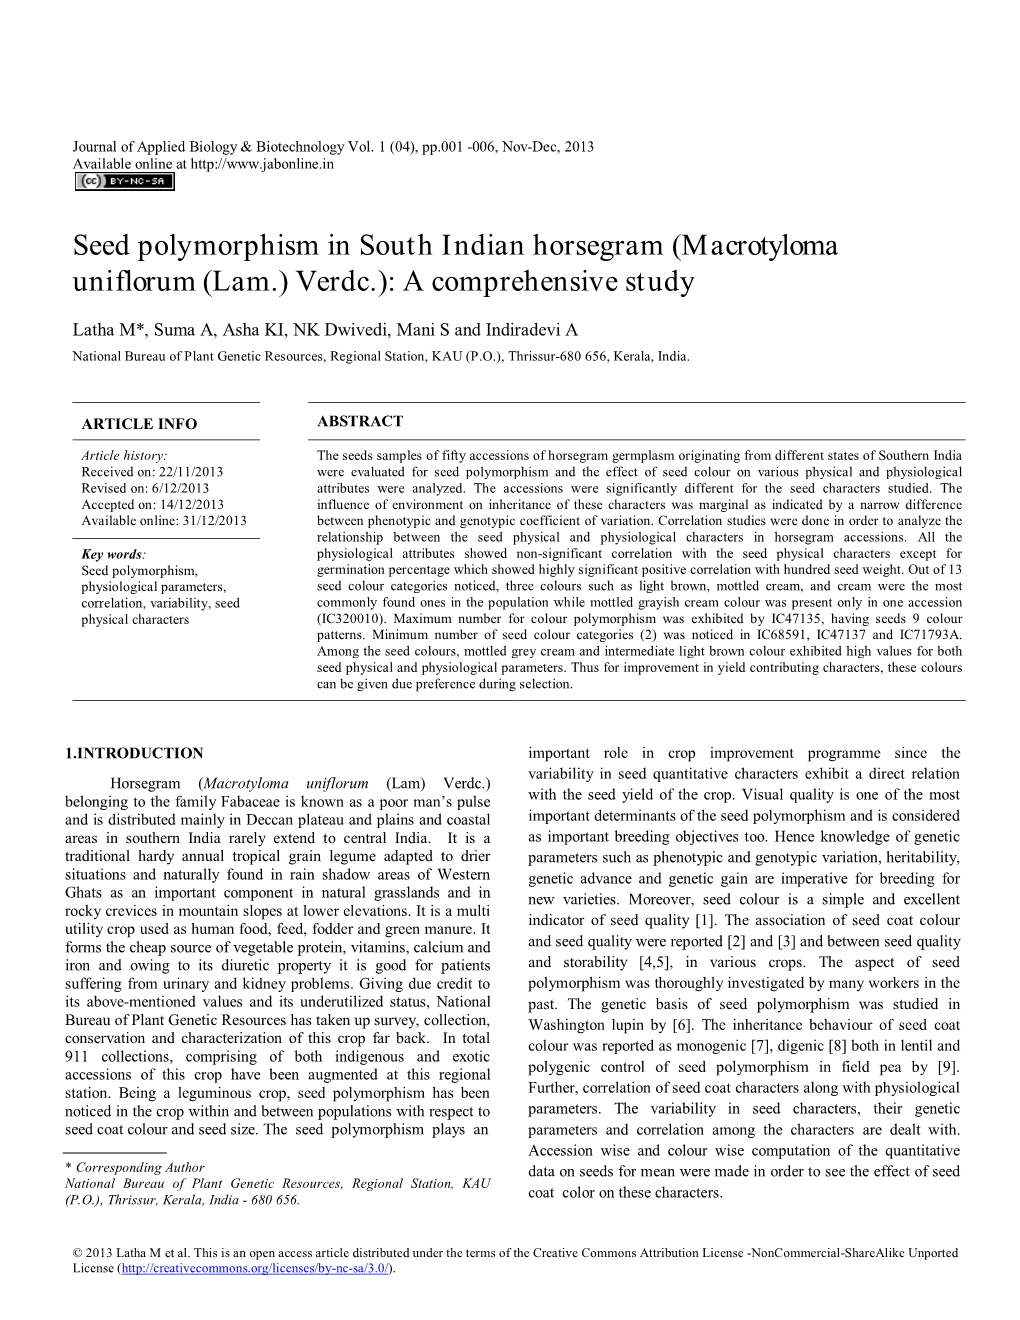 Seed Polymorphism in South Indian Horsegram (Macrotyloma Uniflorum (Lam.) Verdc.): a Comprehensive Study